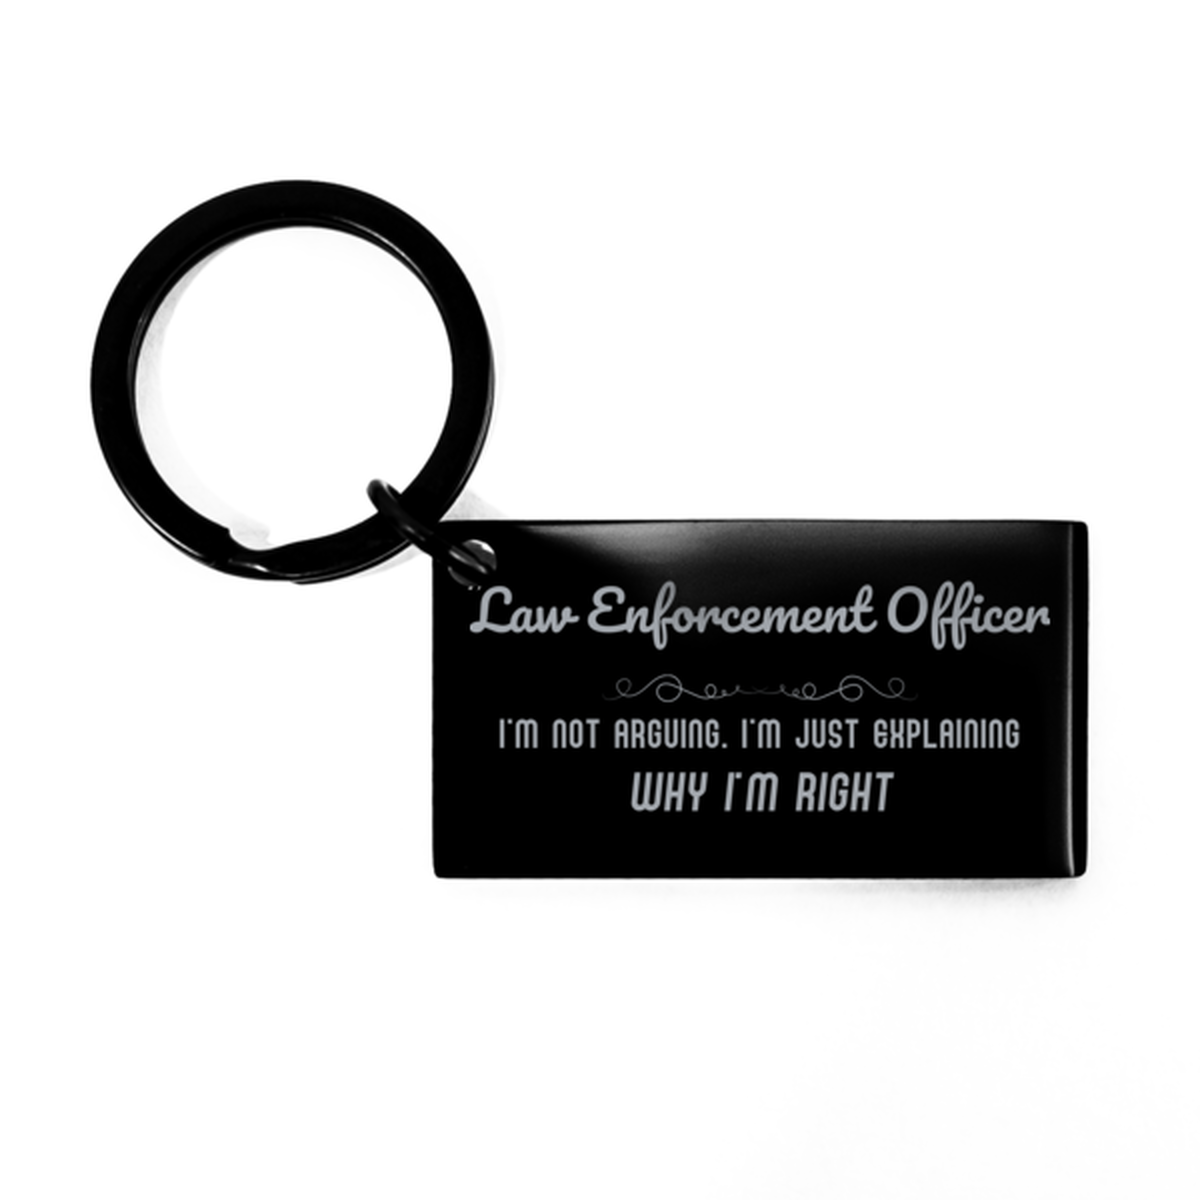 Law Enforcement Officer I'm not Arguing. I'm Just Explaining Why I'm RIGHT Keychain, Funny Saying Quote Law Enforcement Officer Gifts For Law Enforcement Officer Graduation Birthday Christmas Gifts for Men Women Coworker